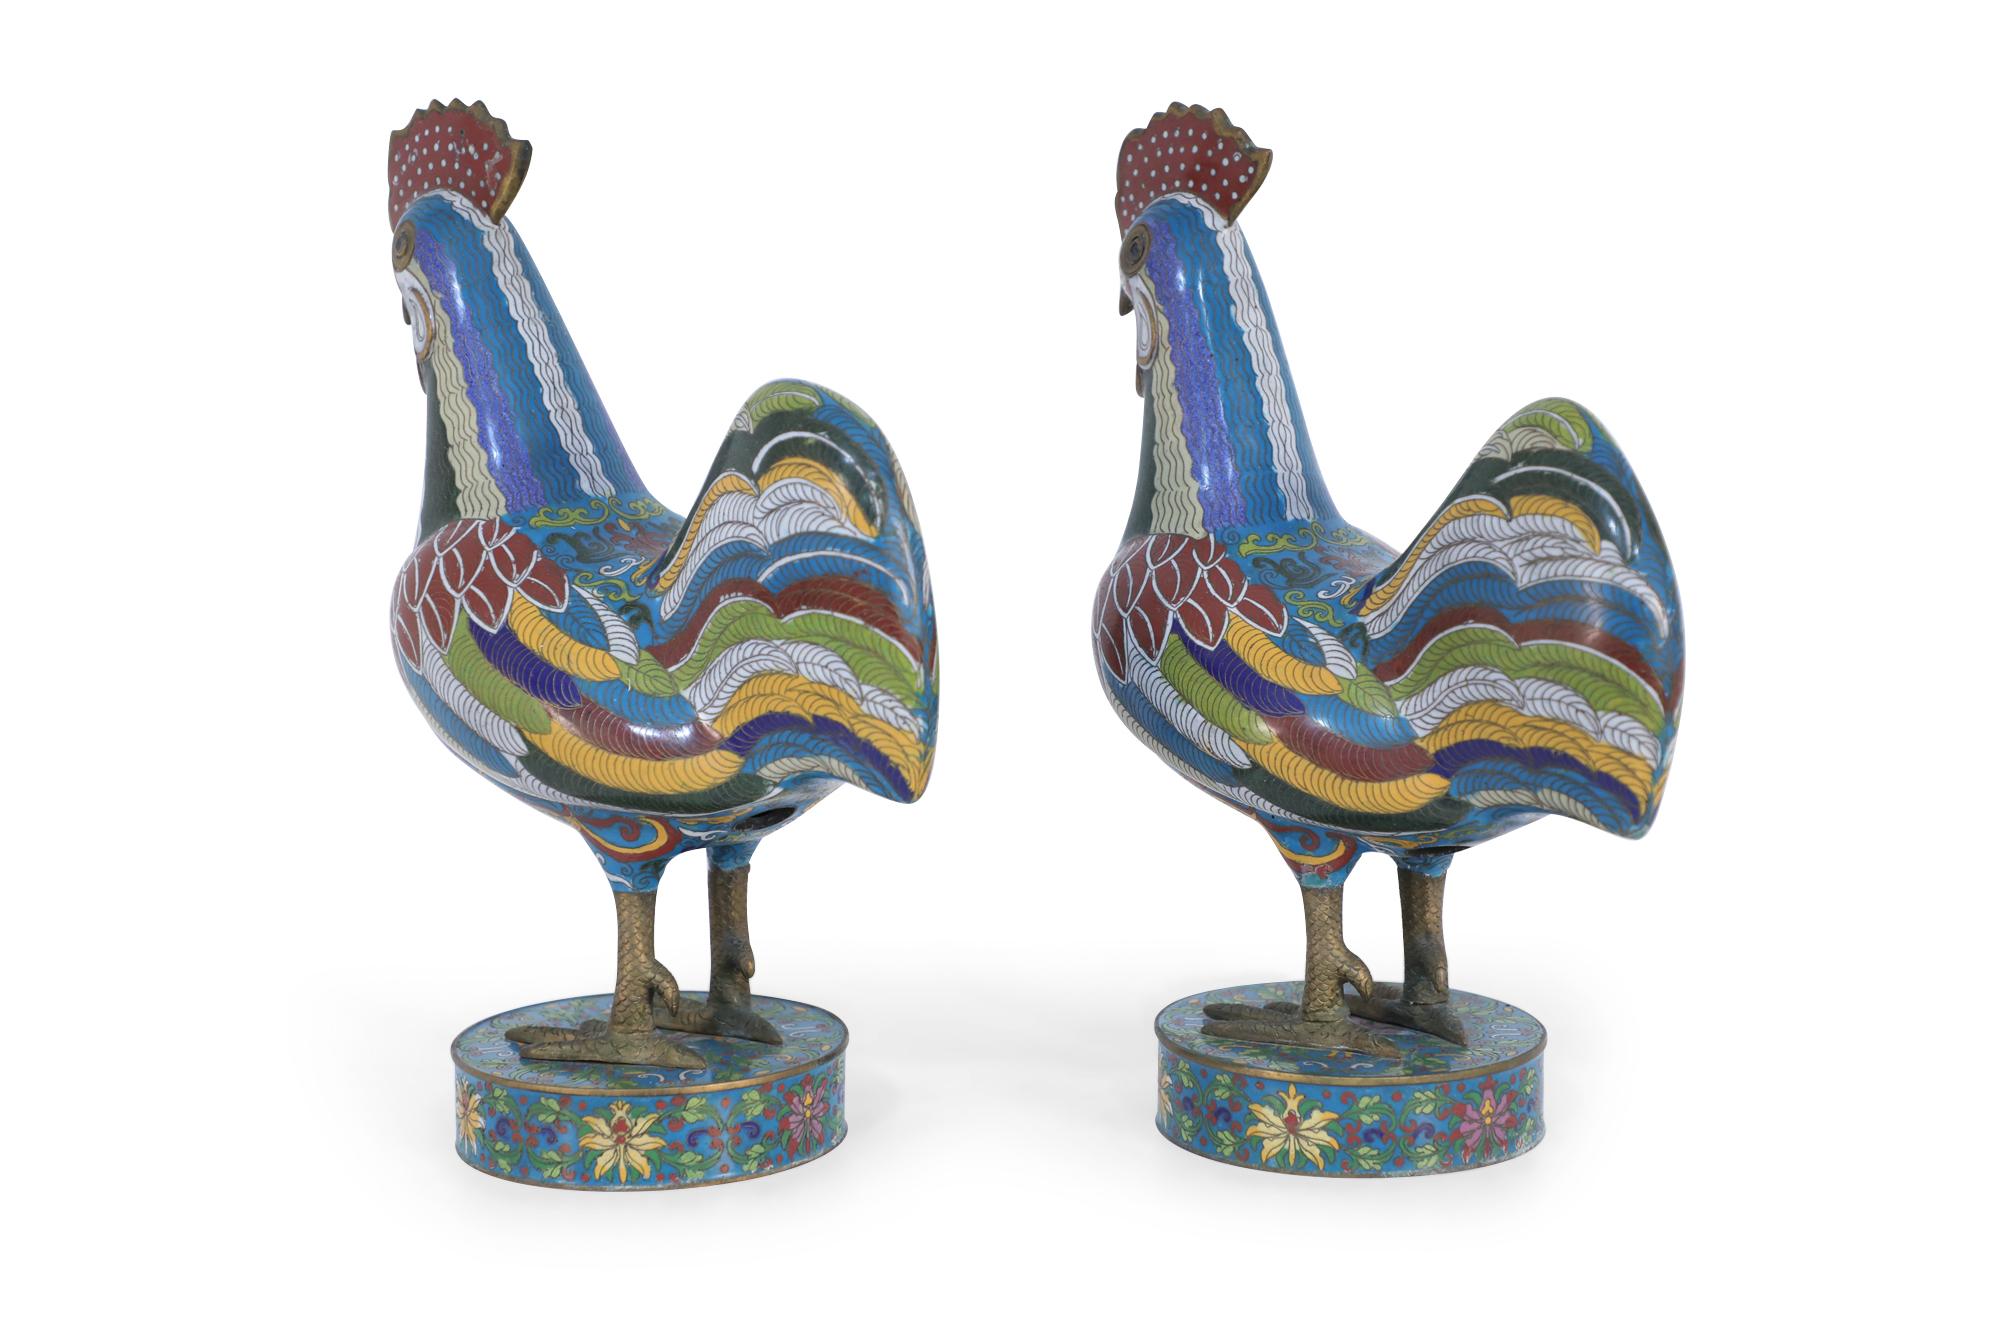 Enamel Pair of Early 20th Century Chinese Multi-Colored Cloisonne Rooster Sculptures For Sale